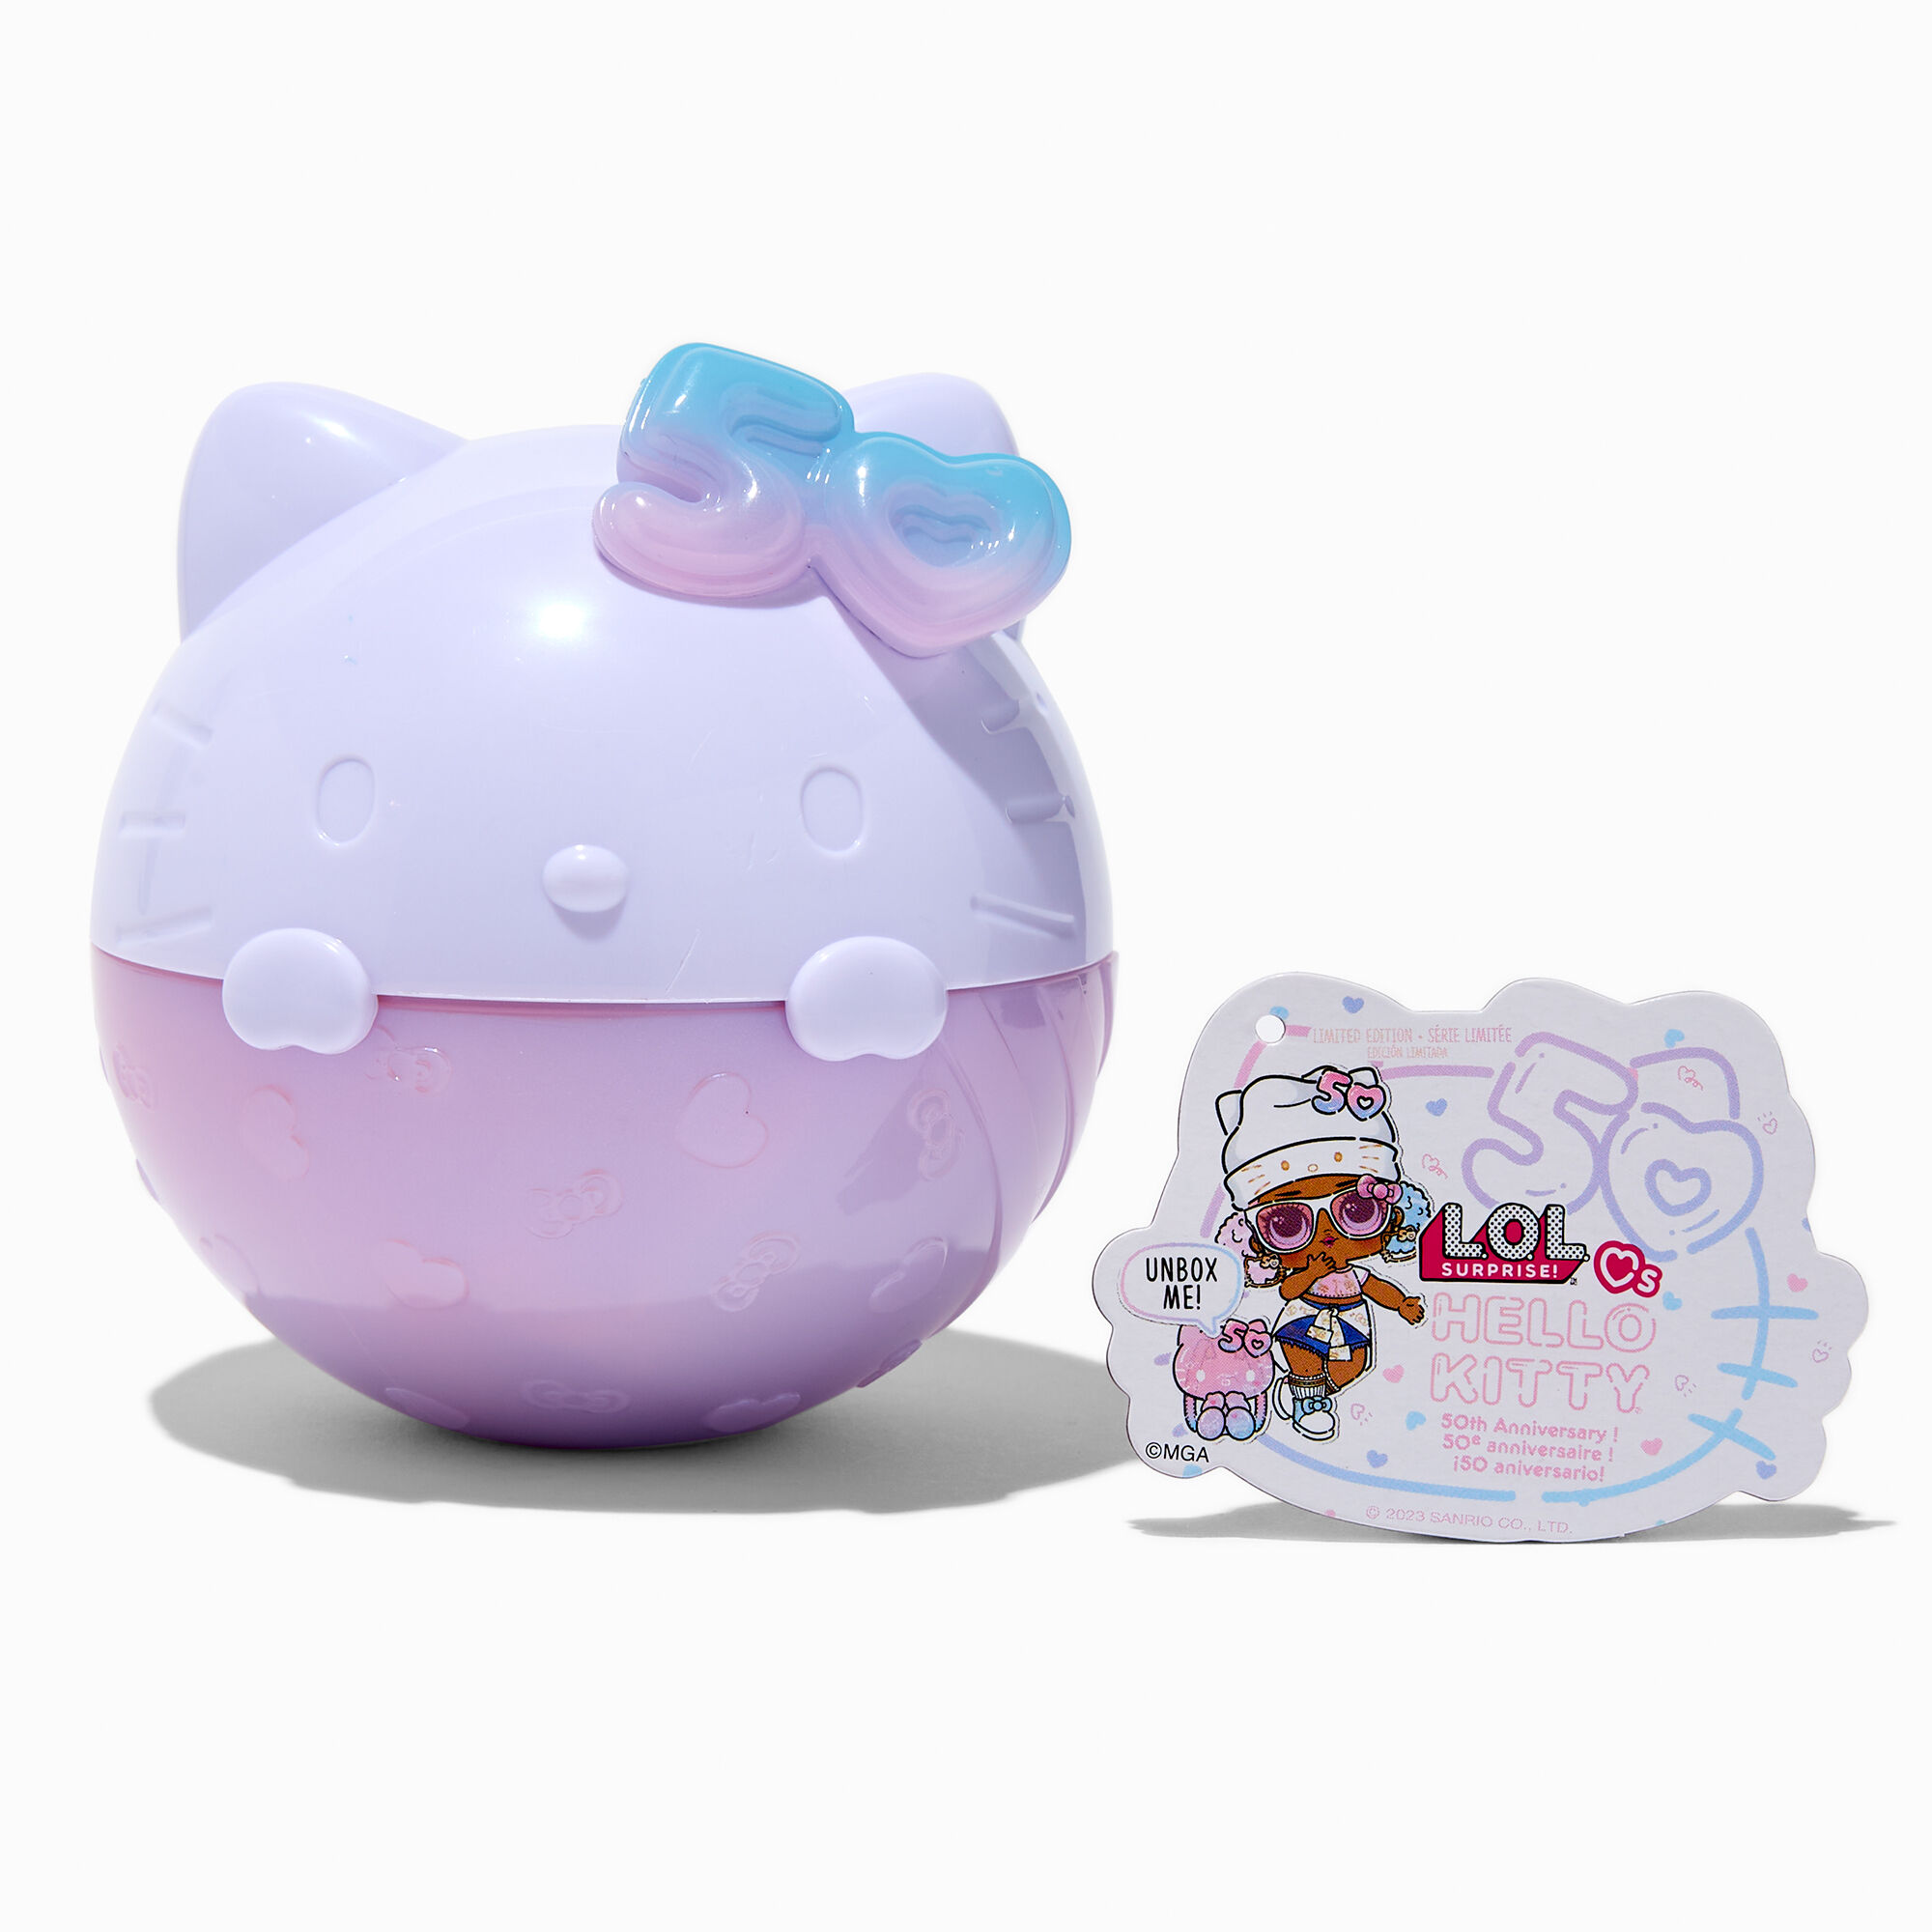 L.O.L. Surprise!™ Hello Kitty® 50th Anniversary Blind Bag - Styles Vary